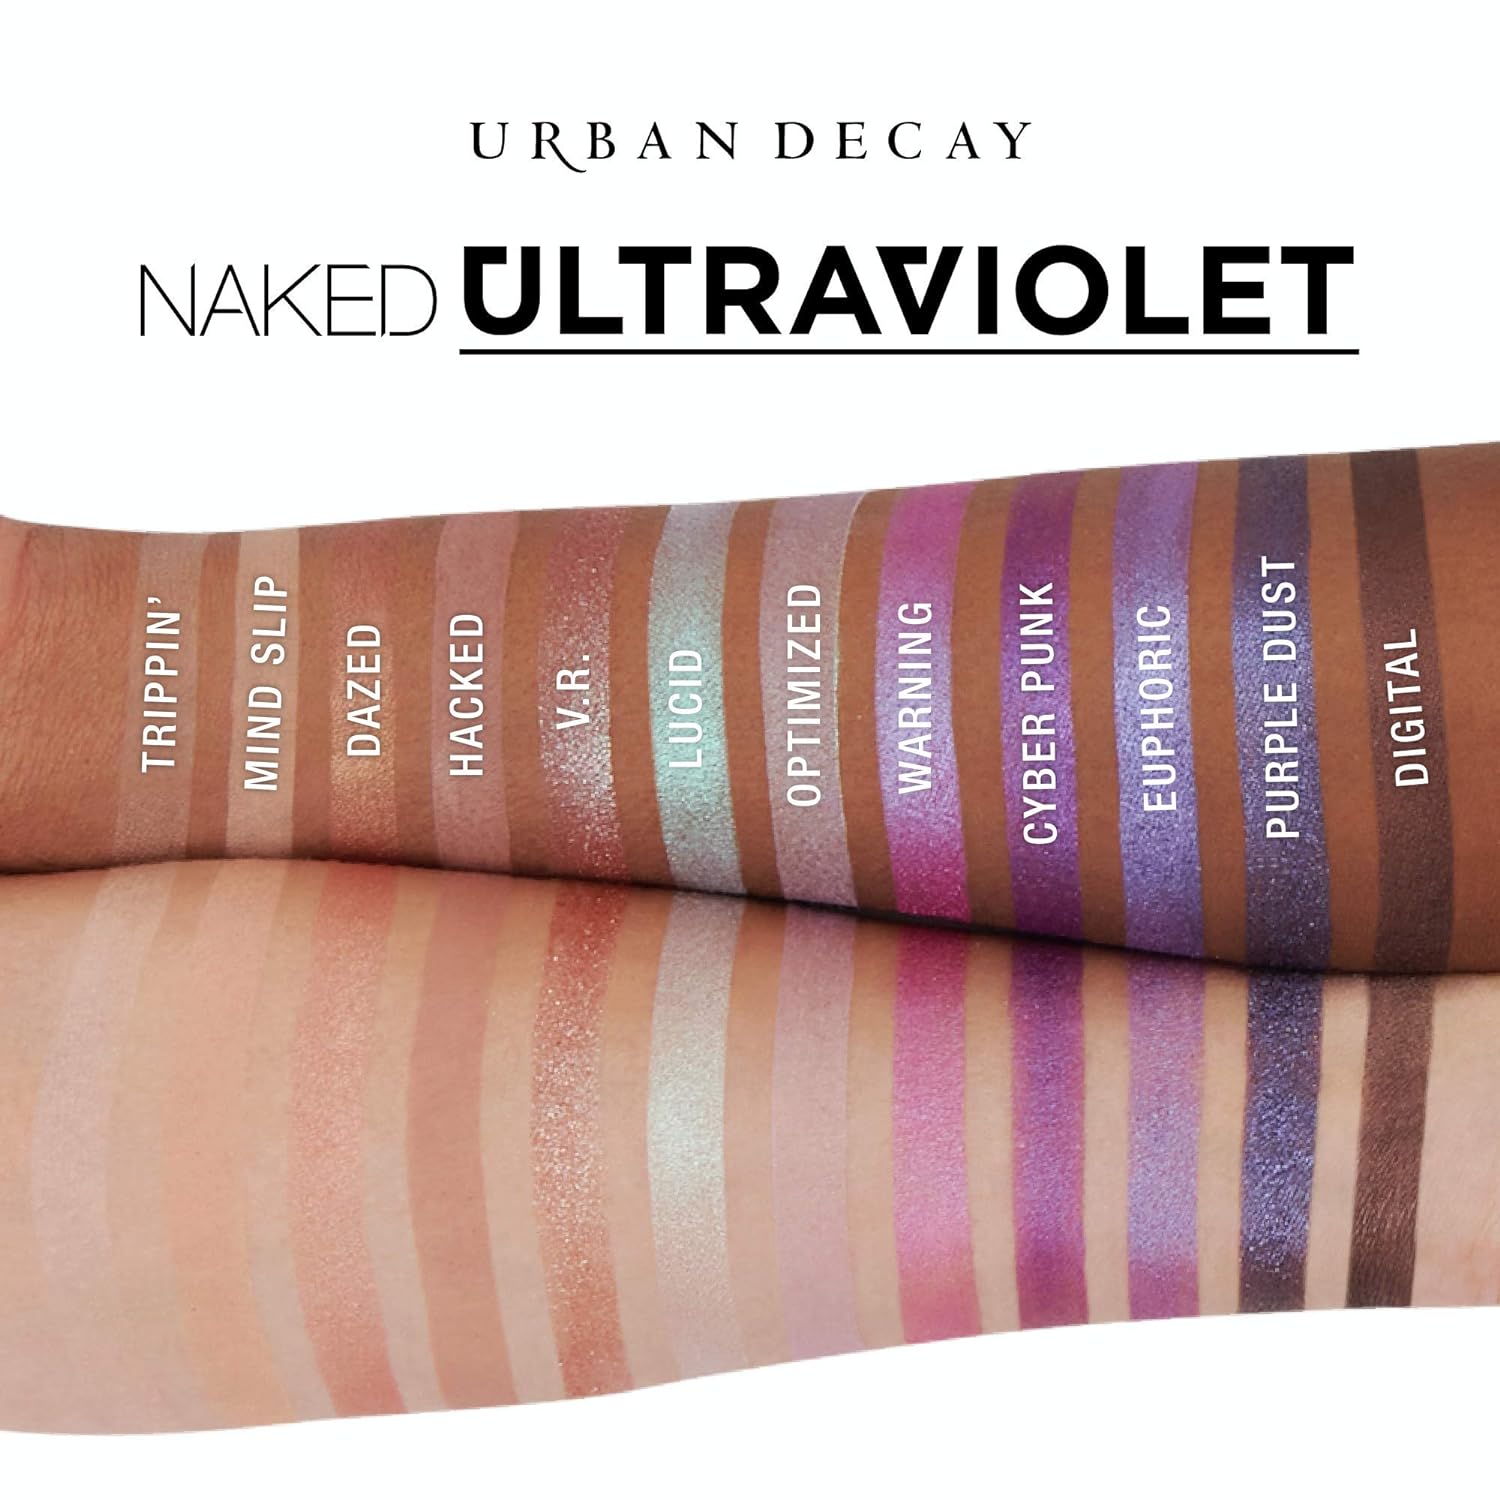  Urban Decay Naked Ultraviolet Eyeshadow Palette, 12 Vivid Neutral Shades with Purple Pop - Ultra-Blendable, Rich Colors with Velvety Texture - Set Includes Mirror & Double-Ended Ma